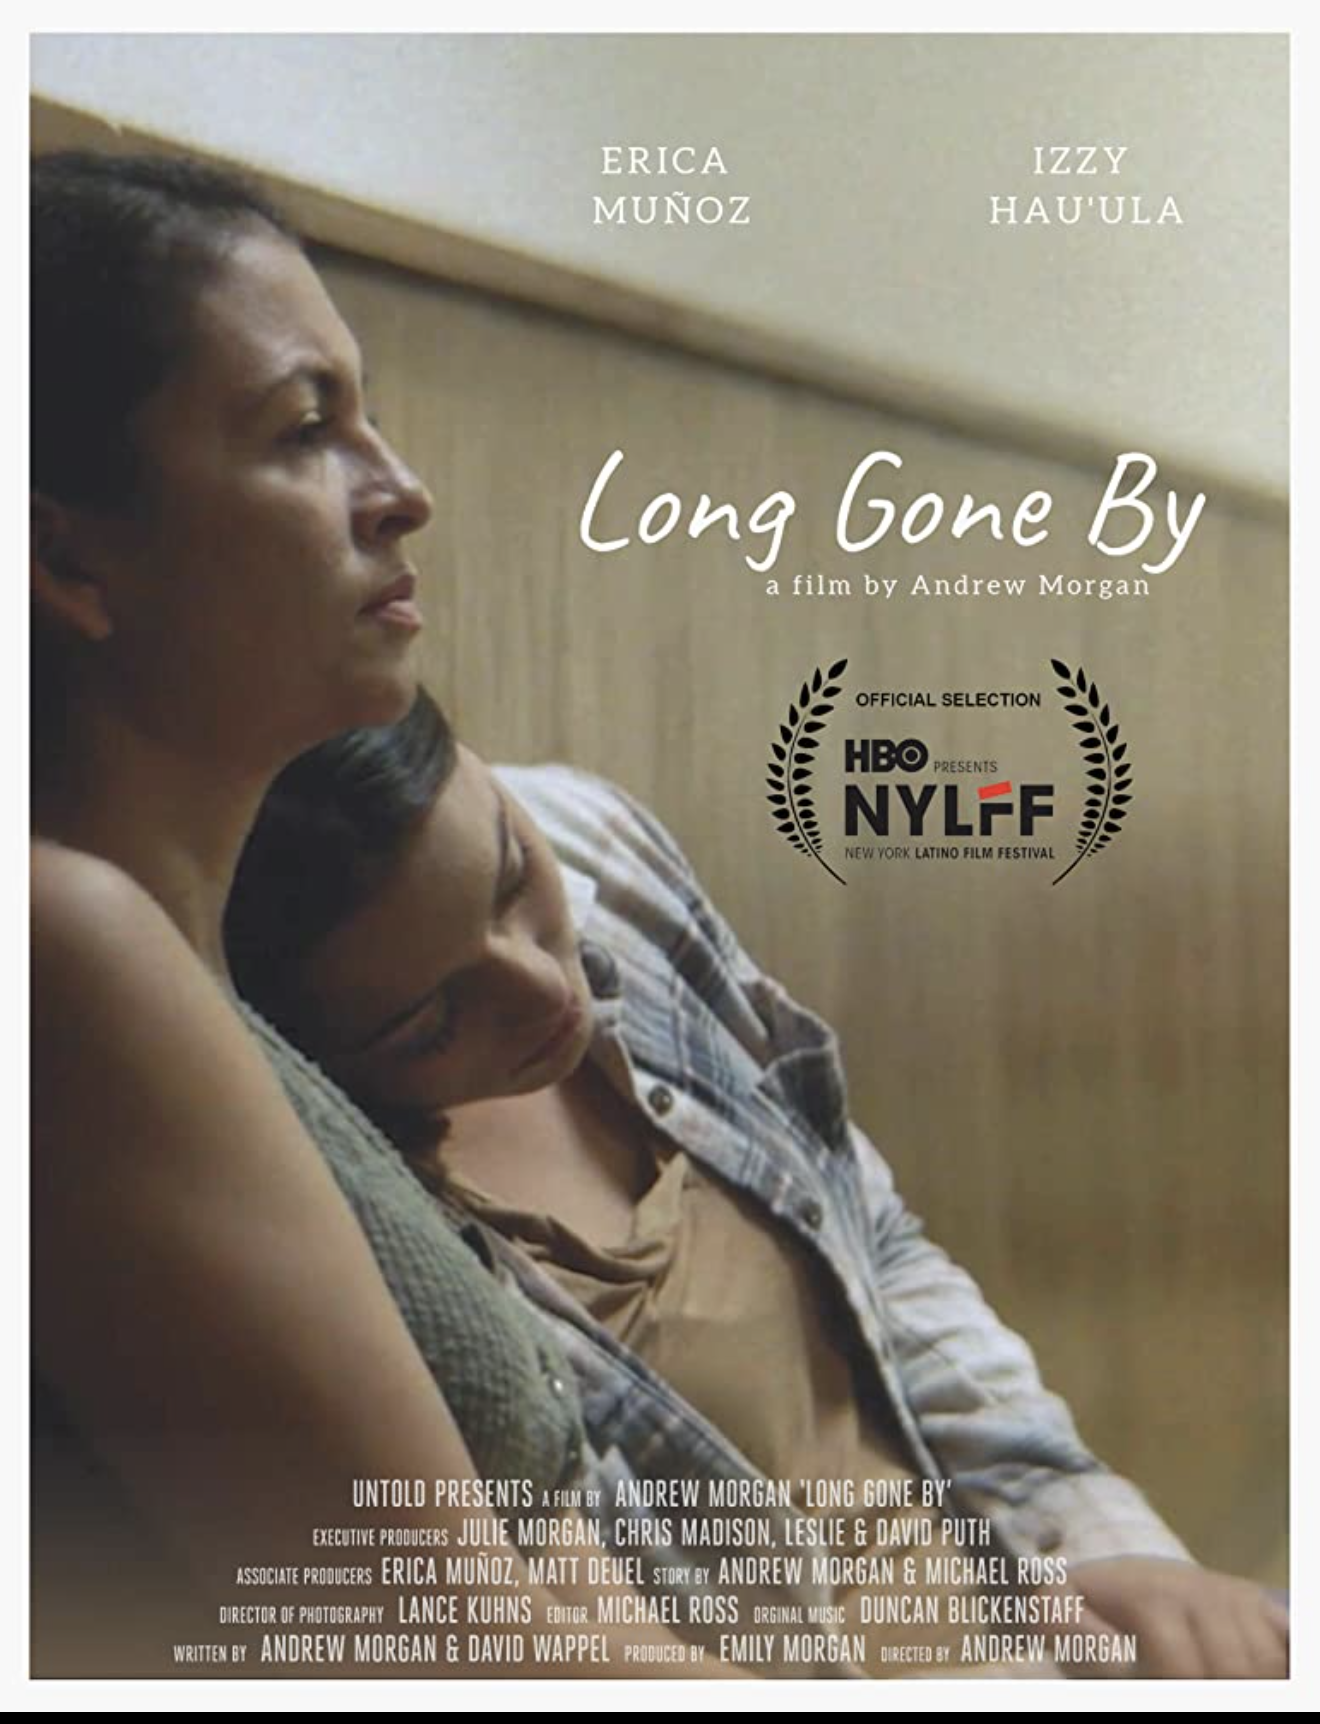 Long Gone By: A Story Of A Mother’s Love With Erica Muñoz [Exclusive Interview]